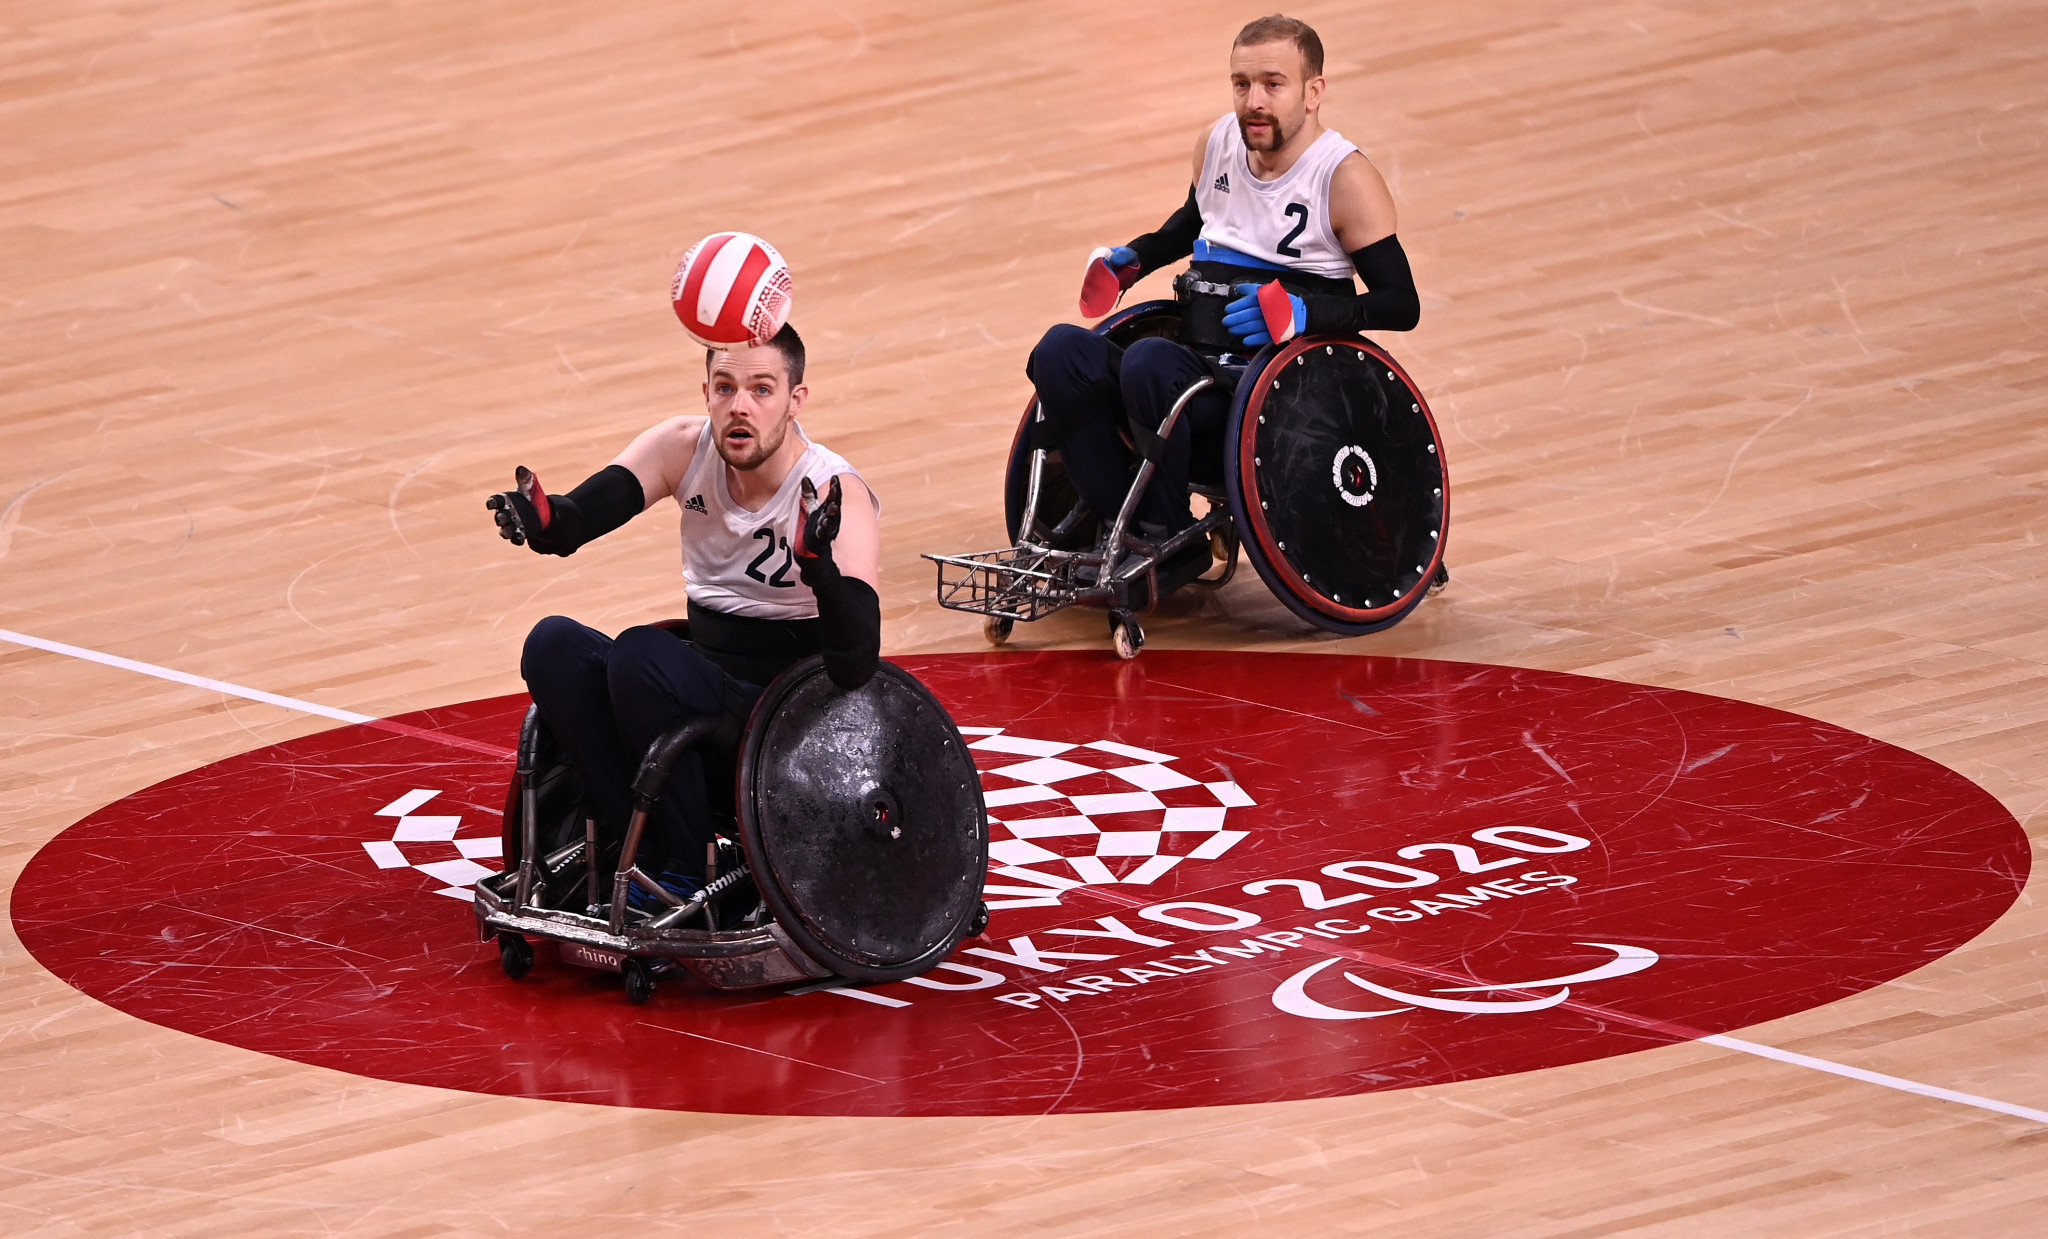 Organisers of Wheelchair Rugby European Championship plan to raise sport's profile in Wales